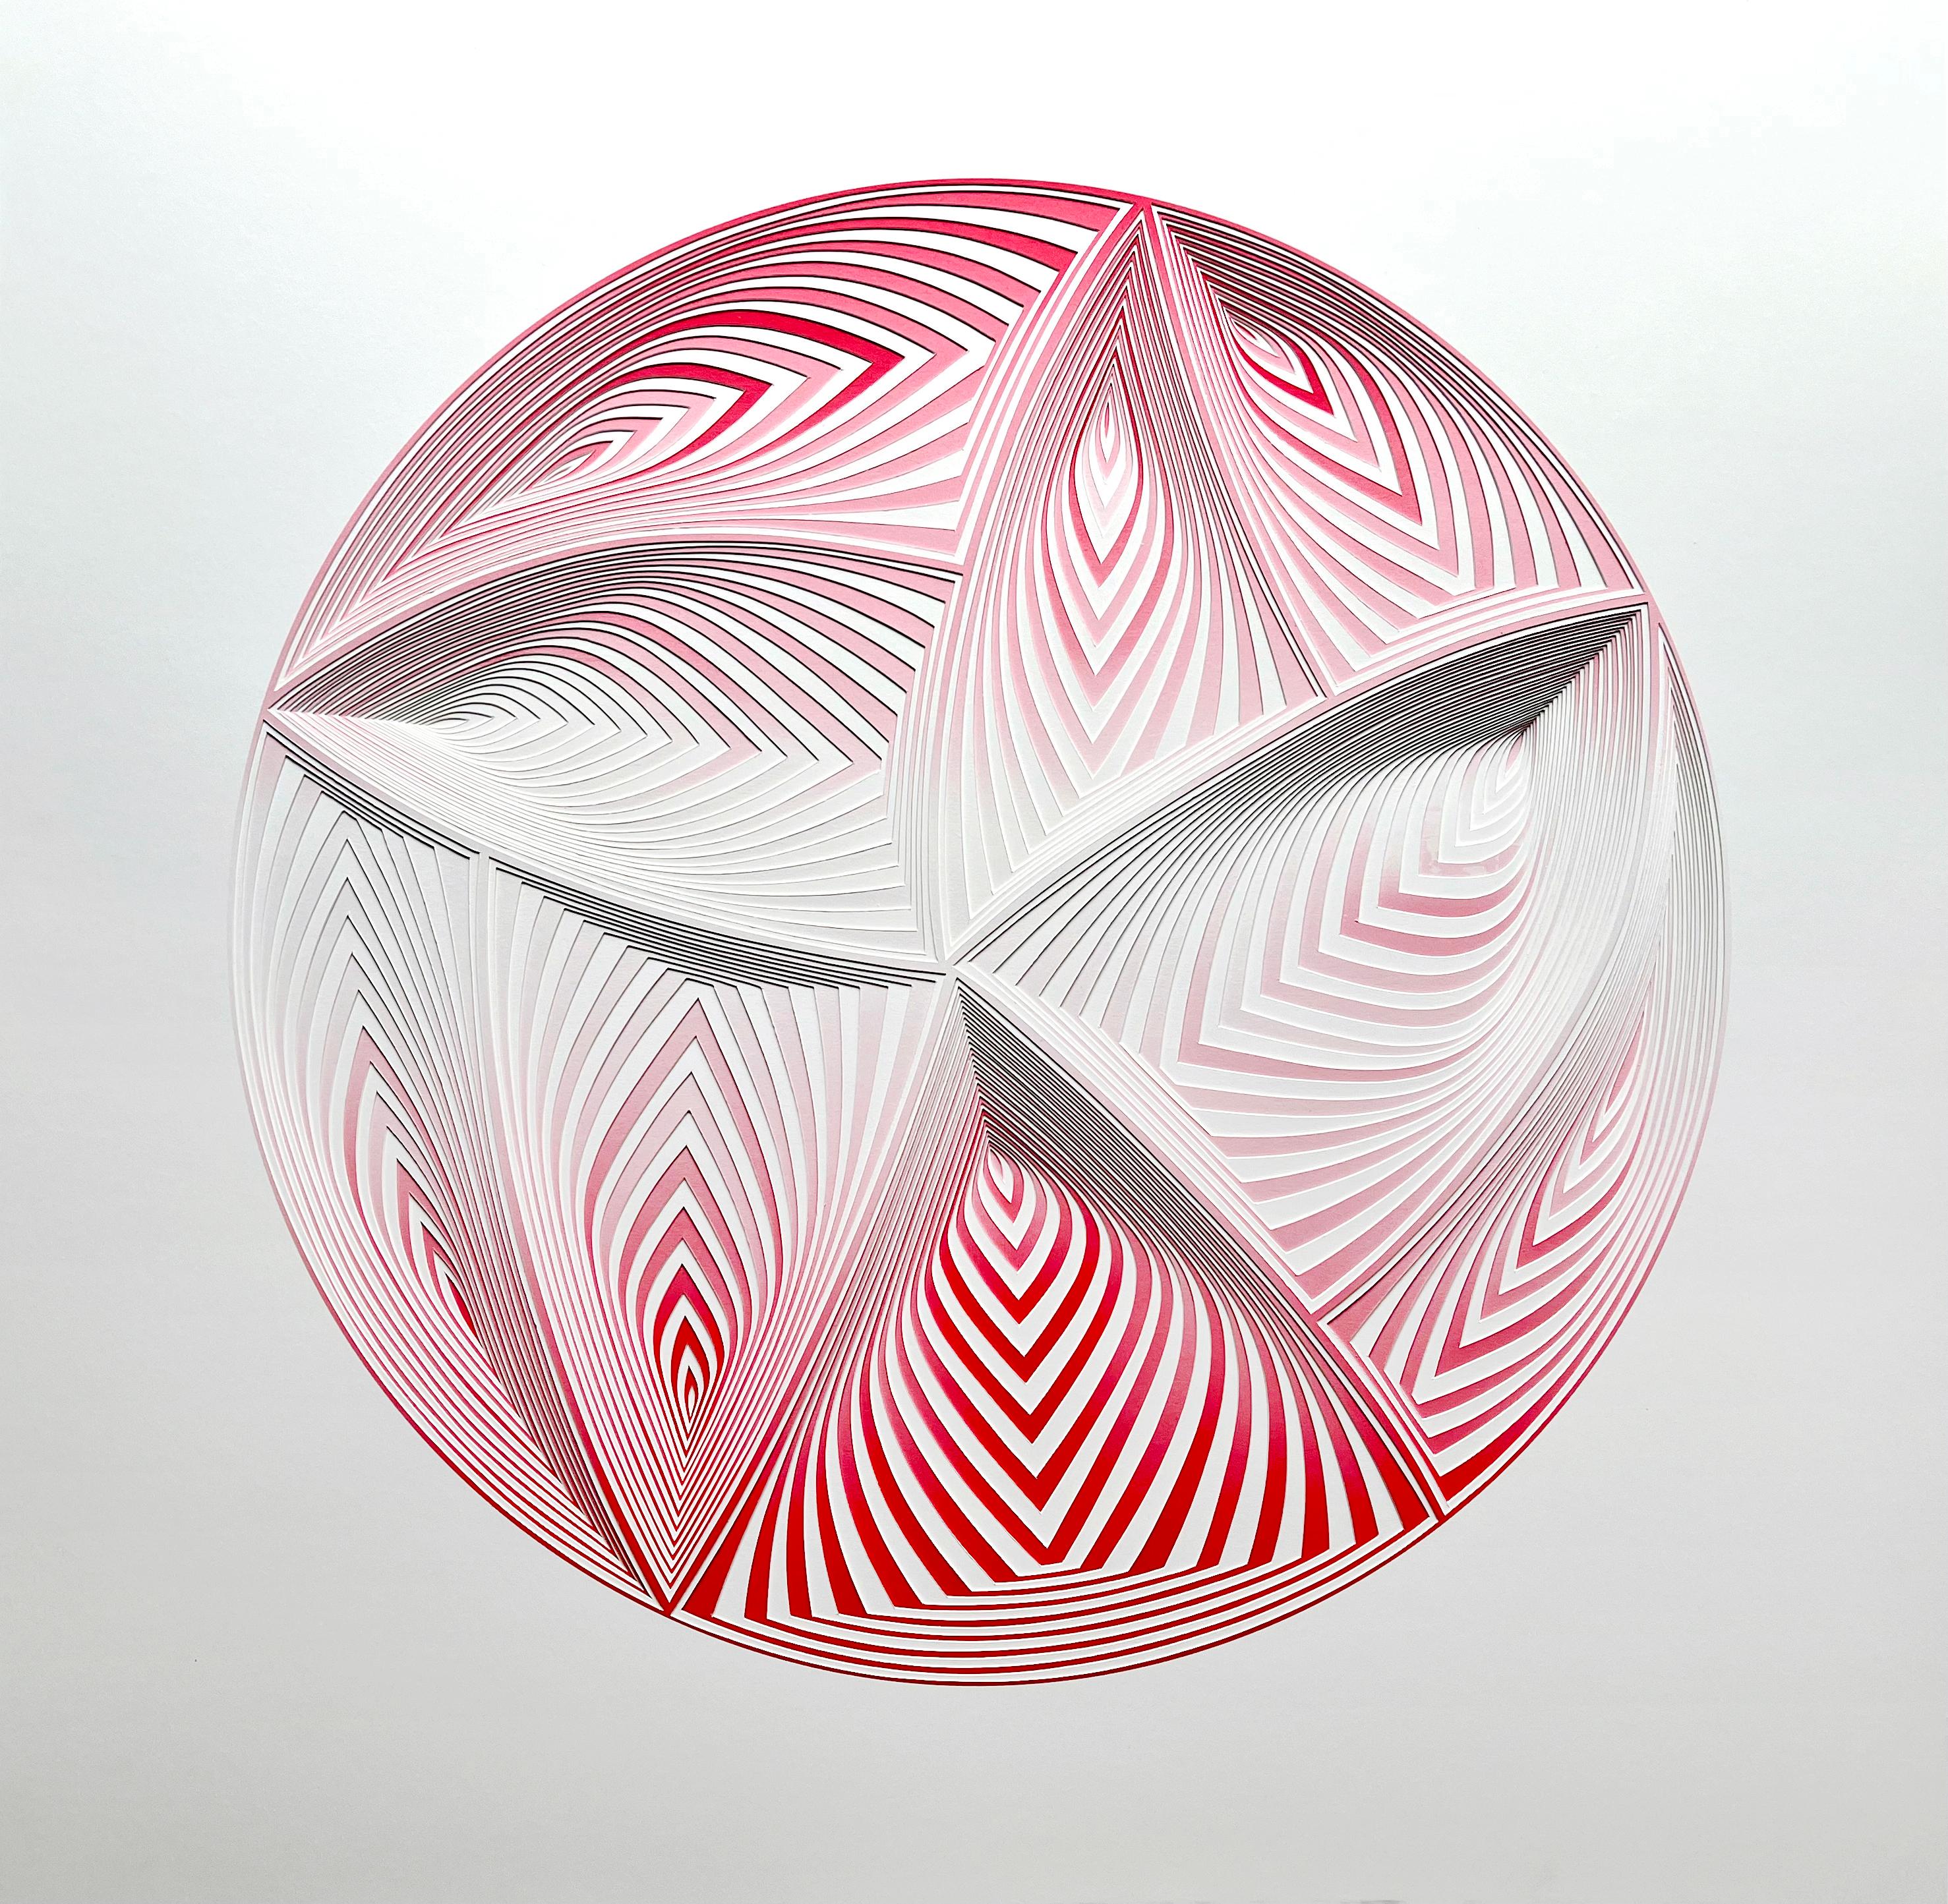 Cutwork: 'Red & White Circle - In'